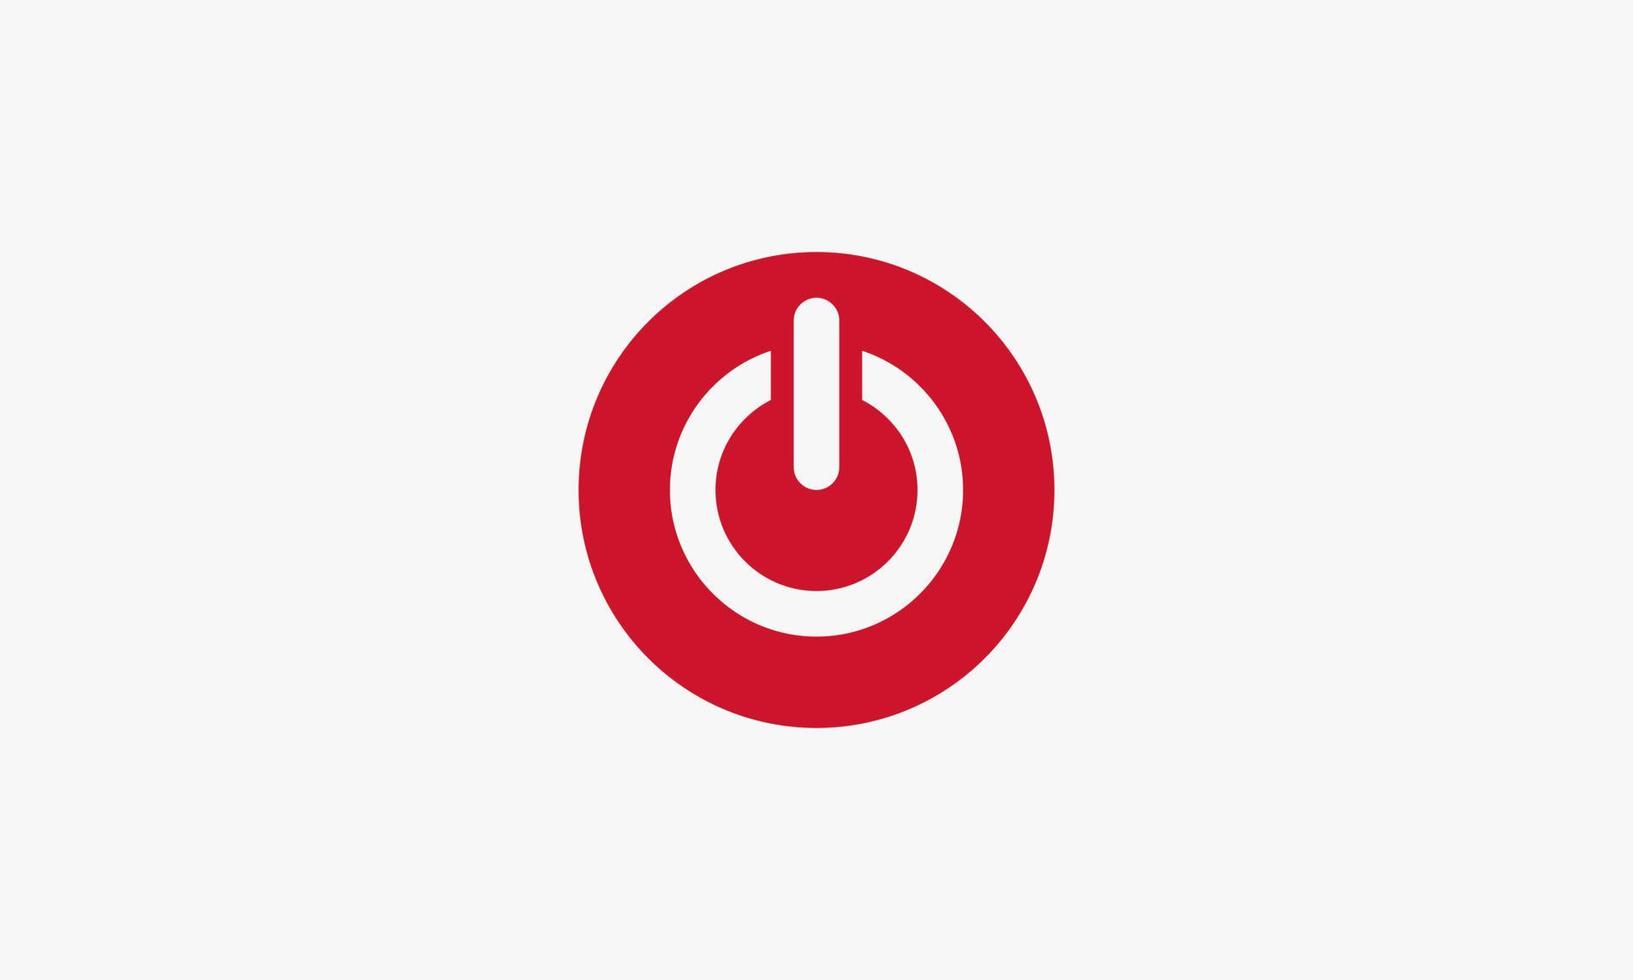 red circle power button. turn on off switch design vector illustration.